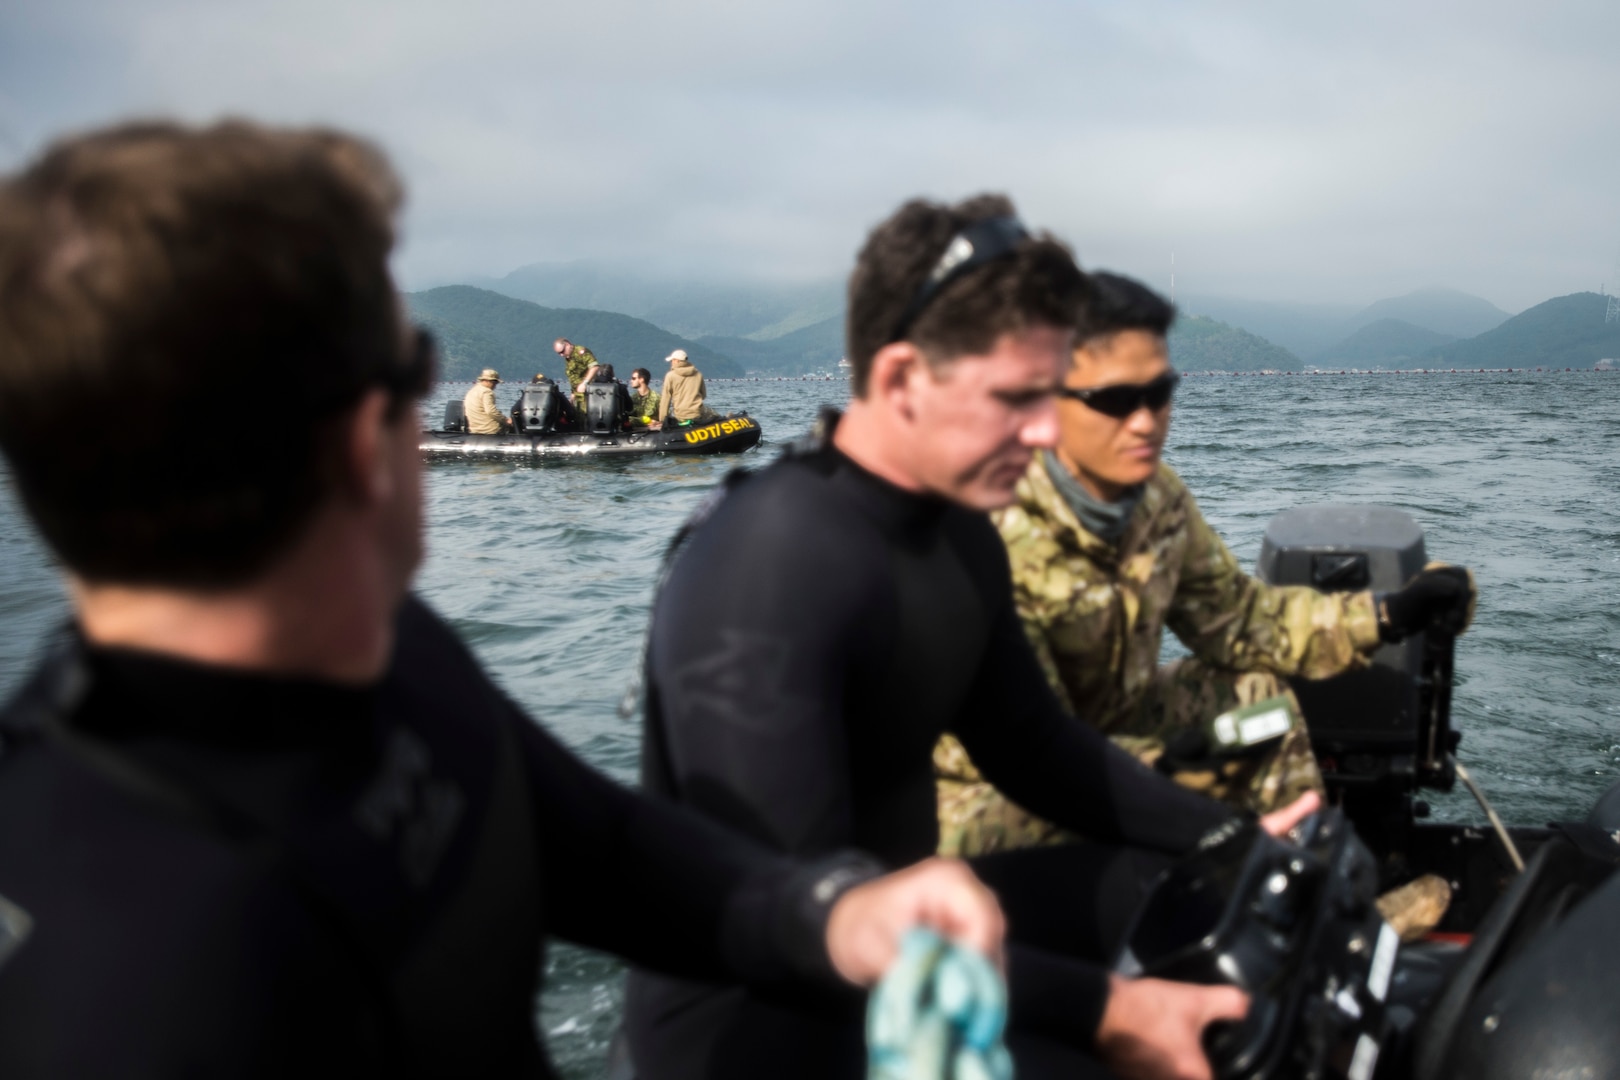 Participants in Clear Horizon conduct diving operations on the waters south of Korea, Oct. 17, 2016. CH16 is a live-action exercise which enhances cooperation and improves capabilities in mine countermeasures operations, with participating nations including Republic of Korea Navy, United States, Australia, Canada, New Zealand, Philippines, Thailand, and the United Kingdom. Navy photo by Petty Officer 2nd Class Daniel Rolston